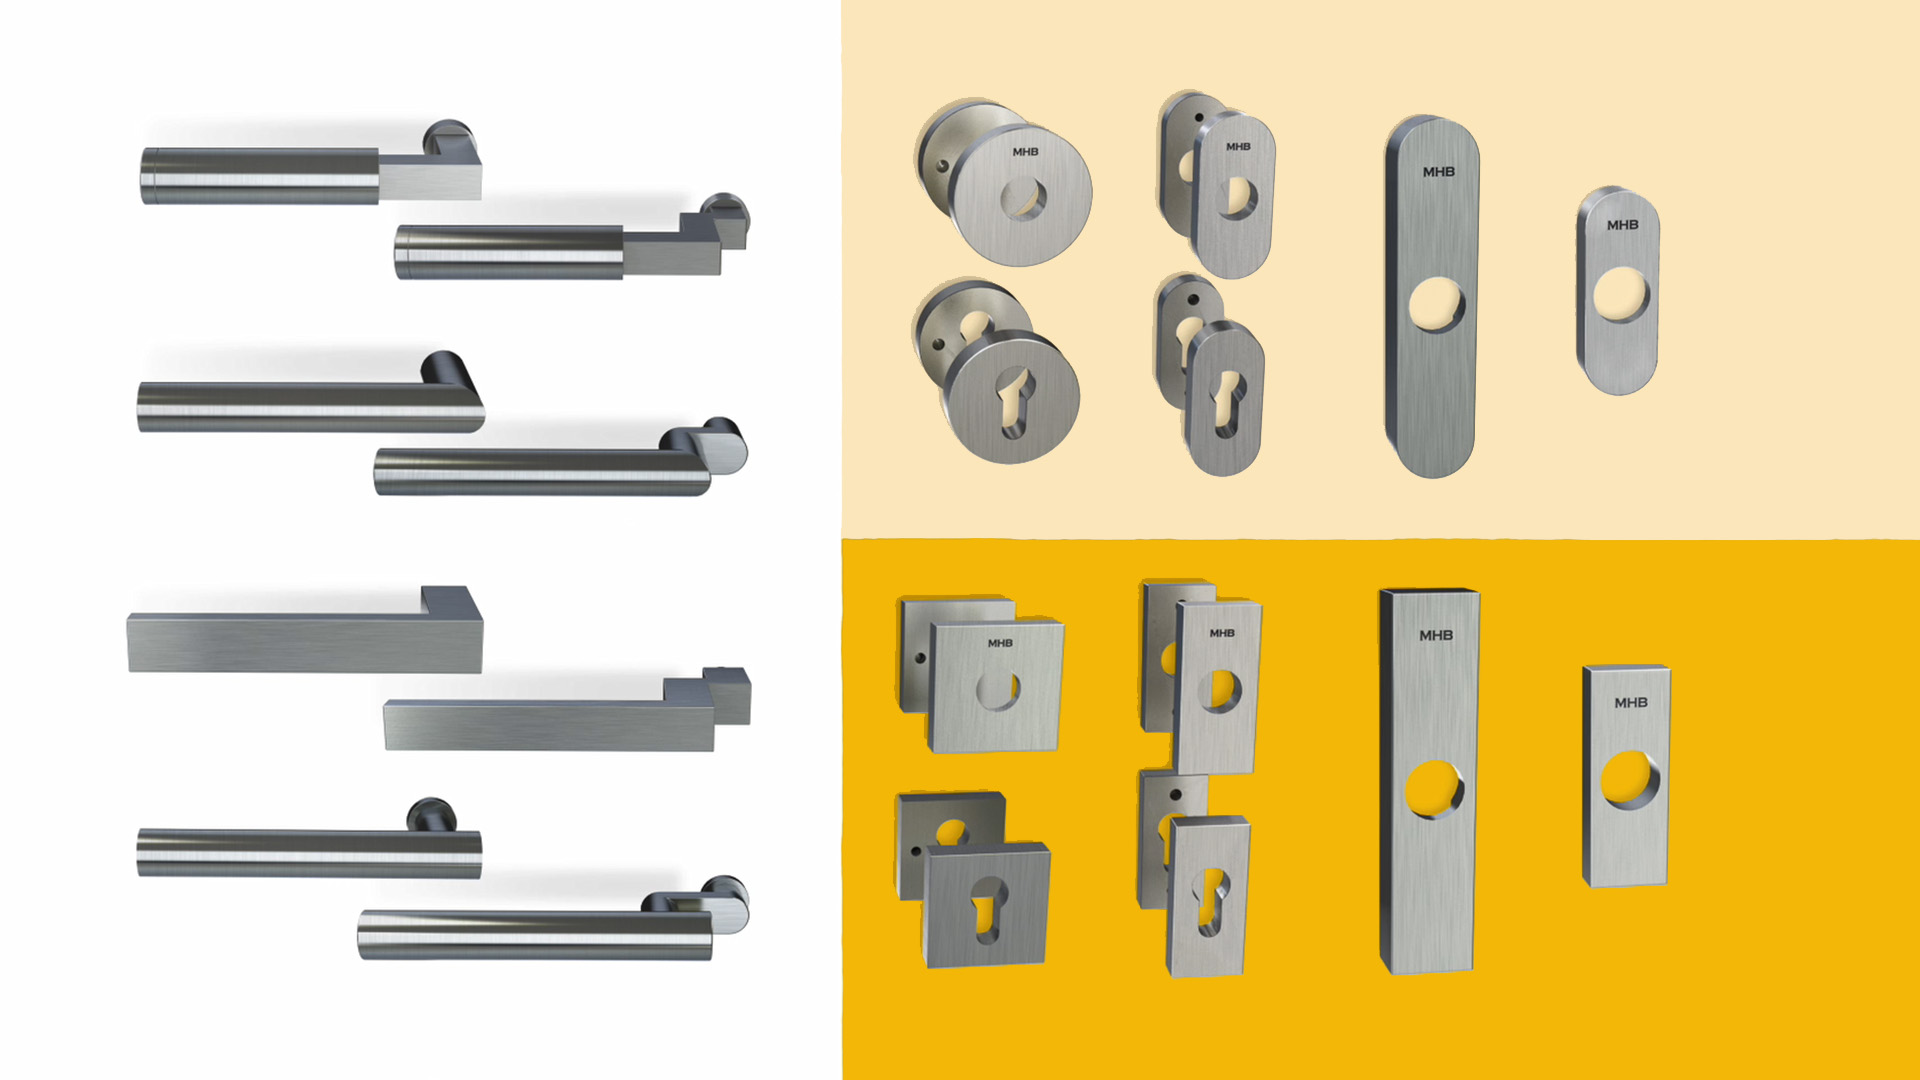 3d rendering overview of all MHB steel handles and escutcheons